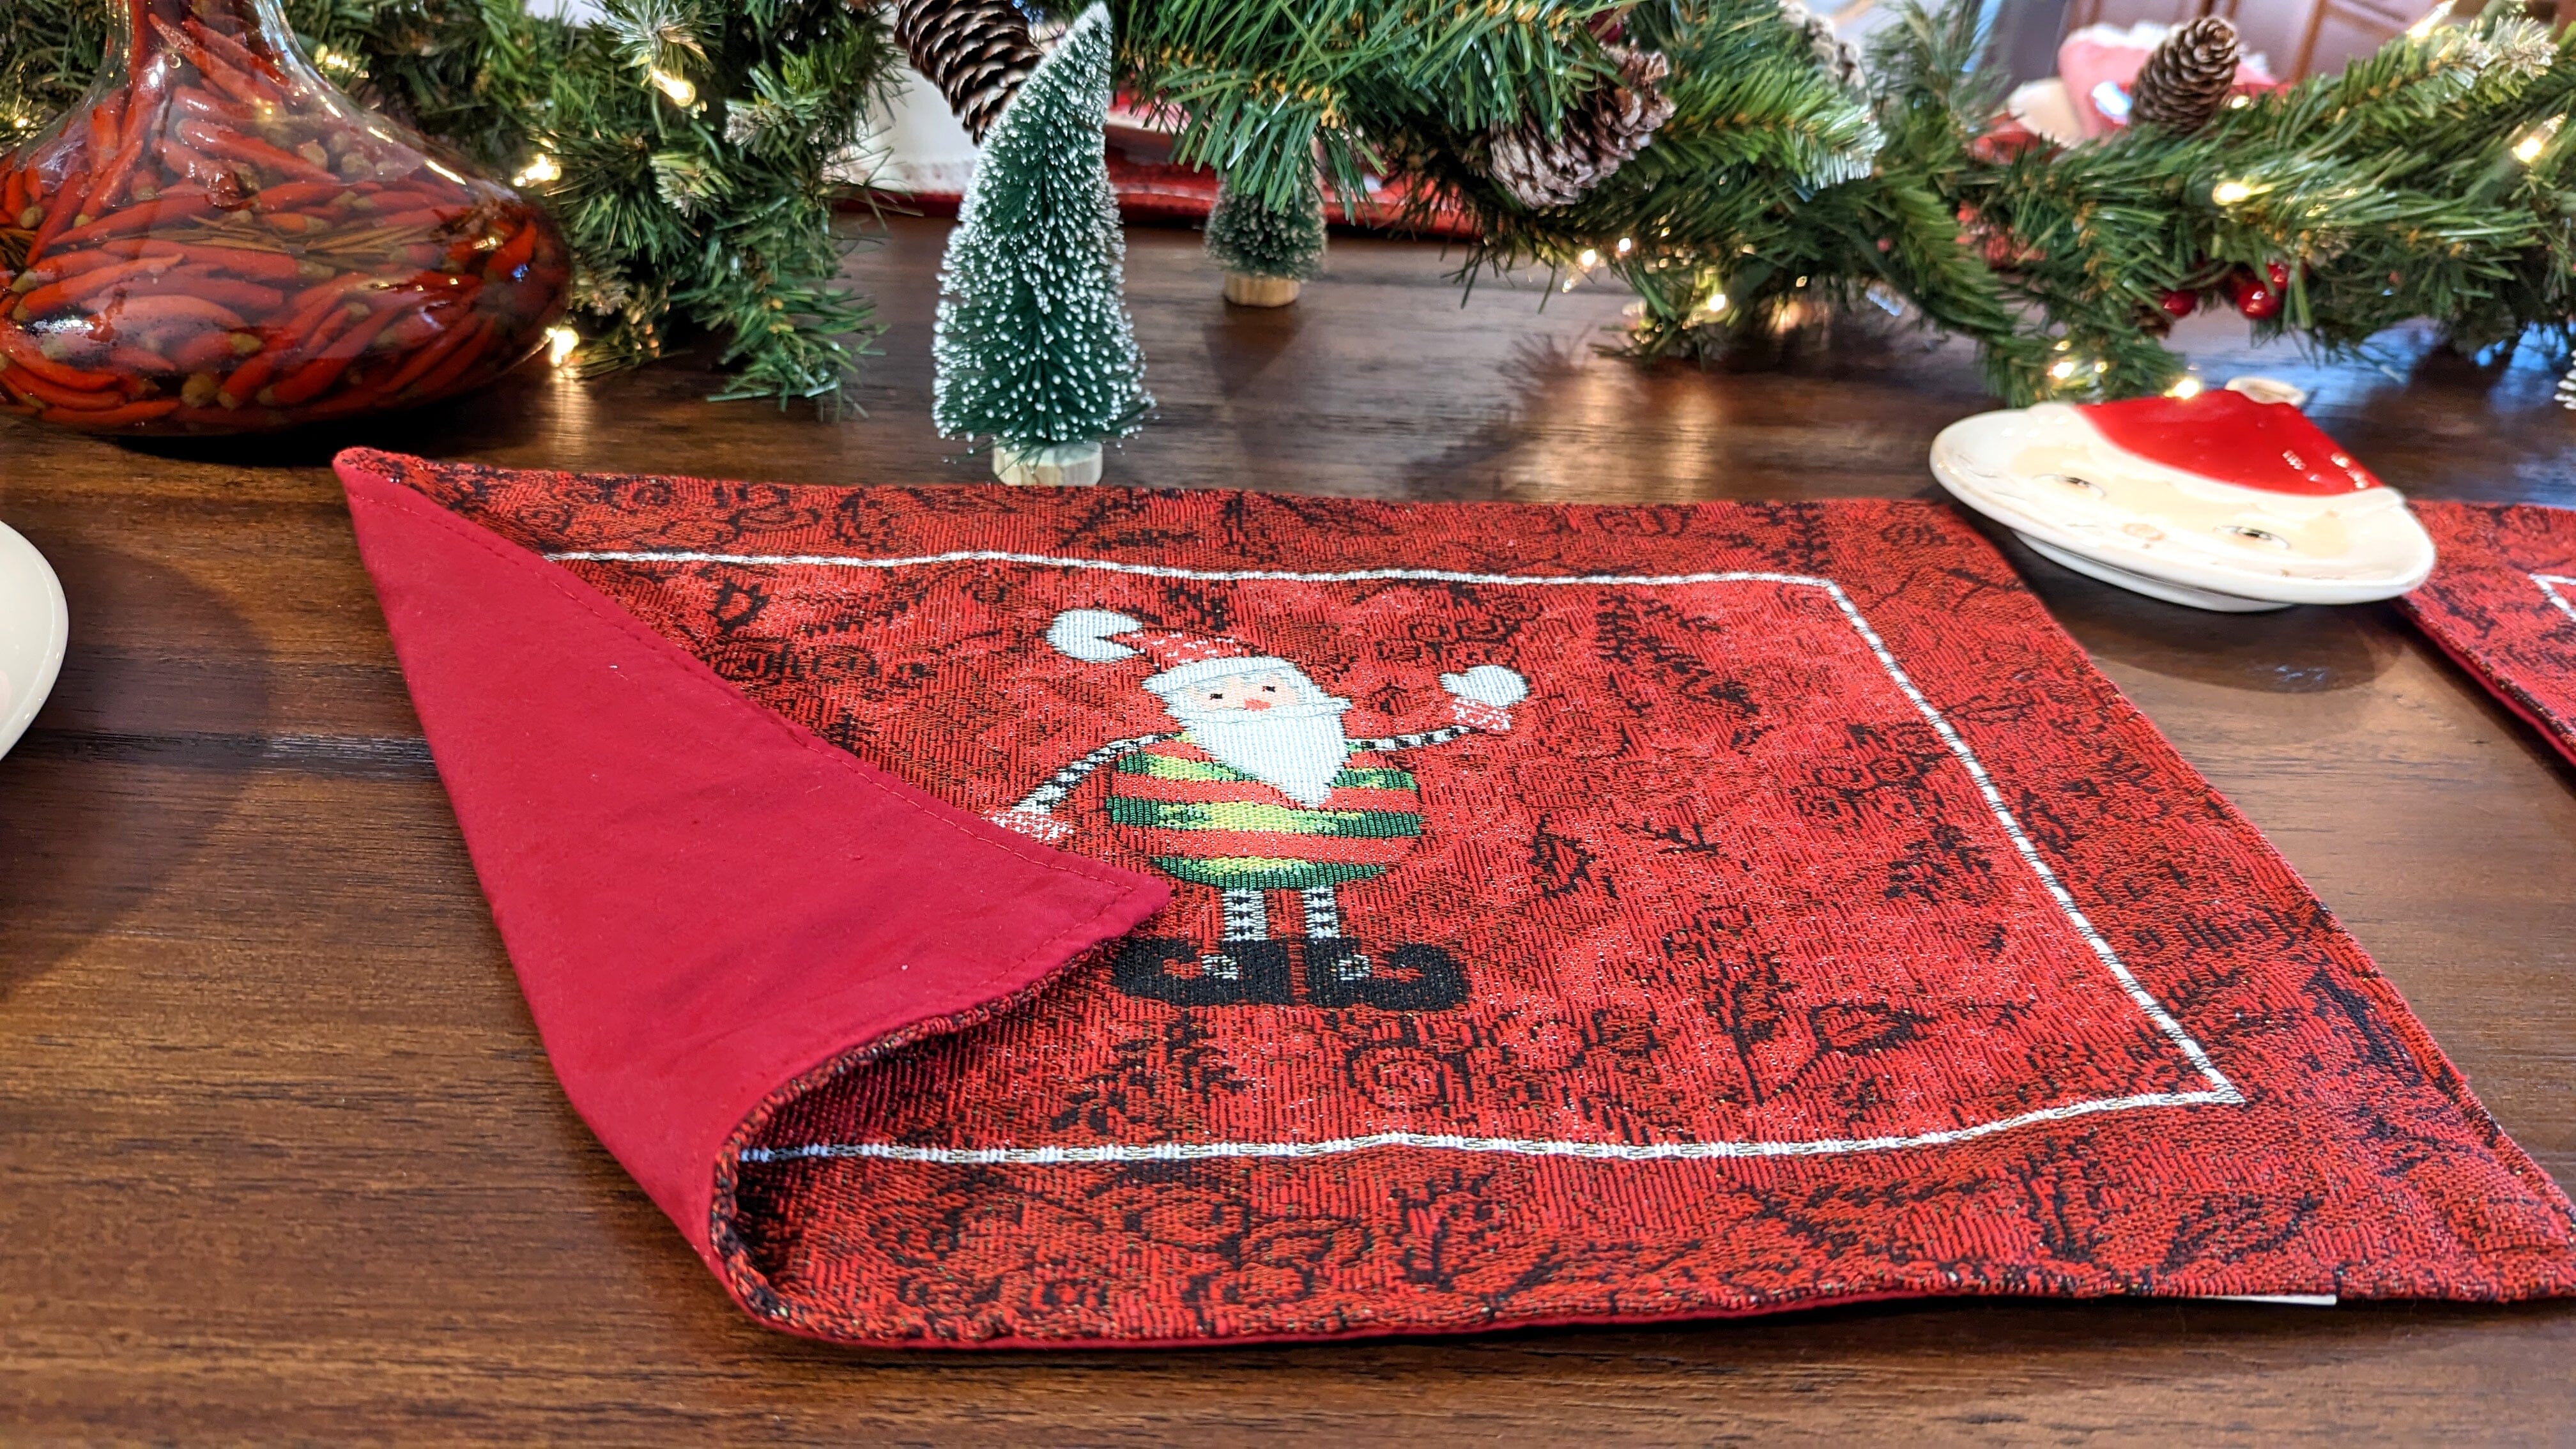 Tache Here Comes Santa Claus Vintage Holiday Woven Tapestry Red Christmas Placemat Set of 4